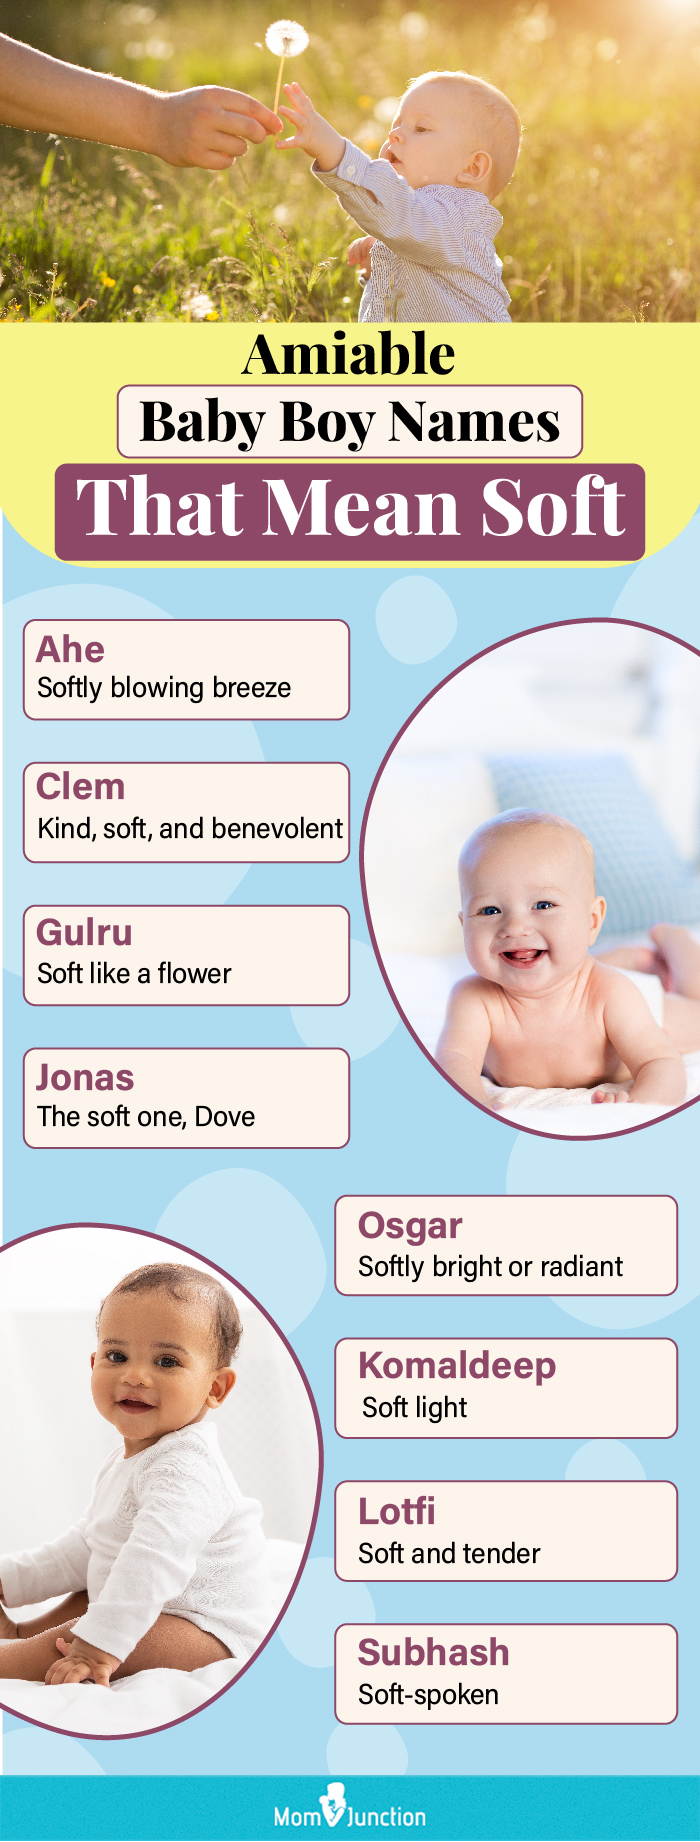 gracious baby boy names meaning soft (infographic)